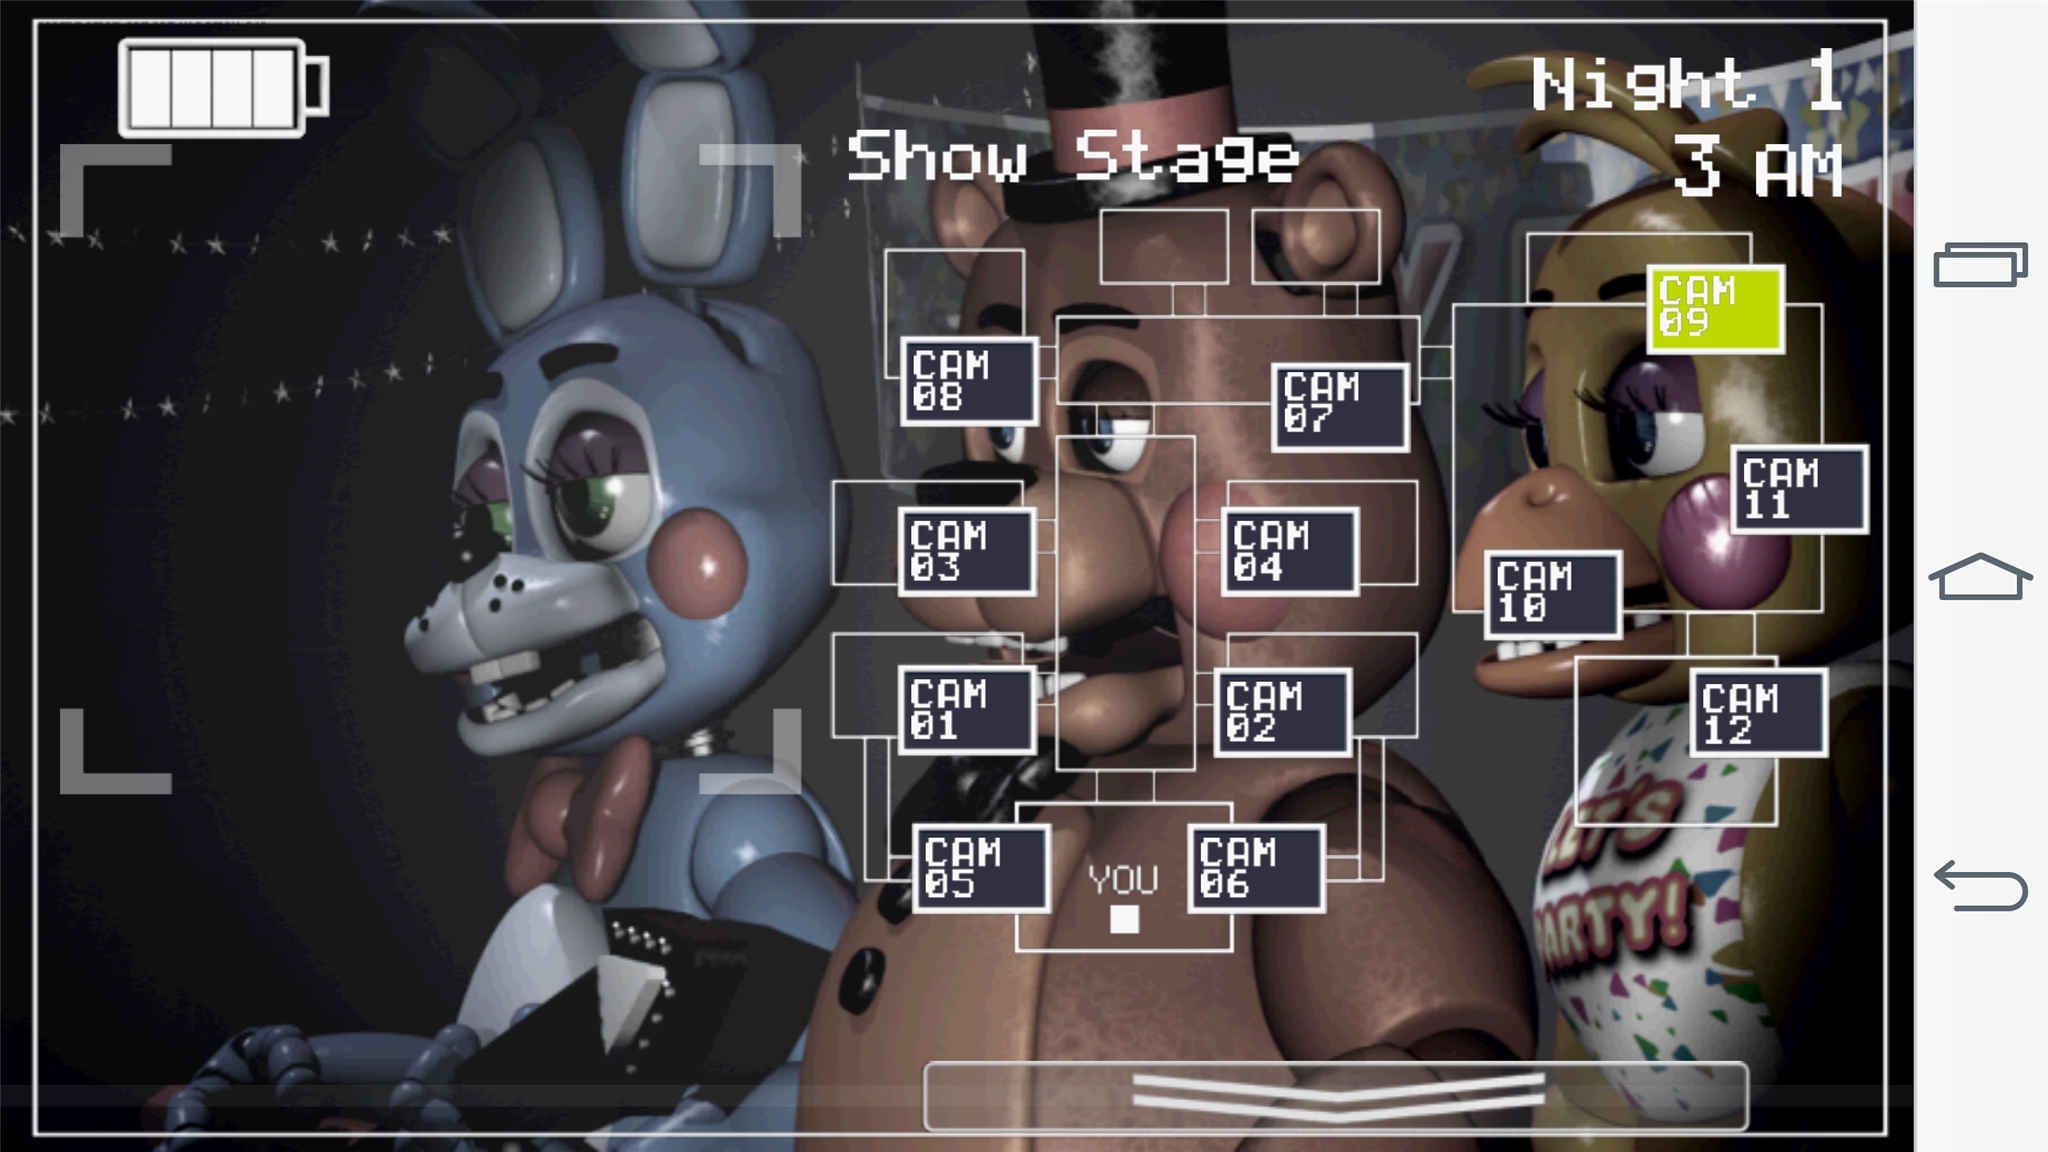 Five Nights At Freddy S - Toy Bonnie On Stage - HD Wallpaper 